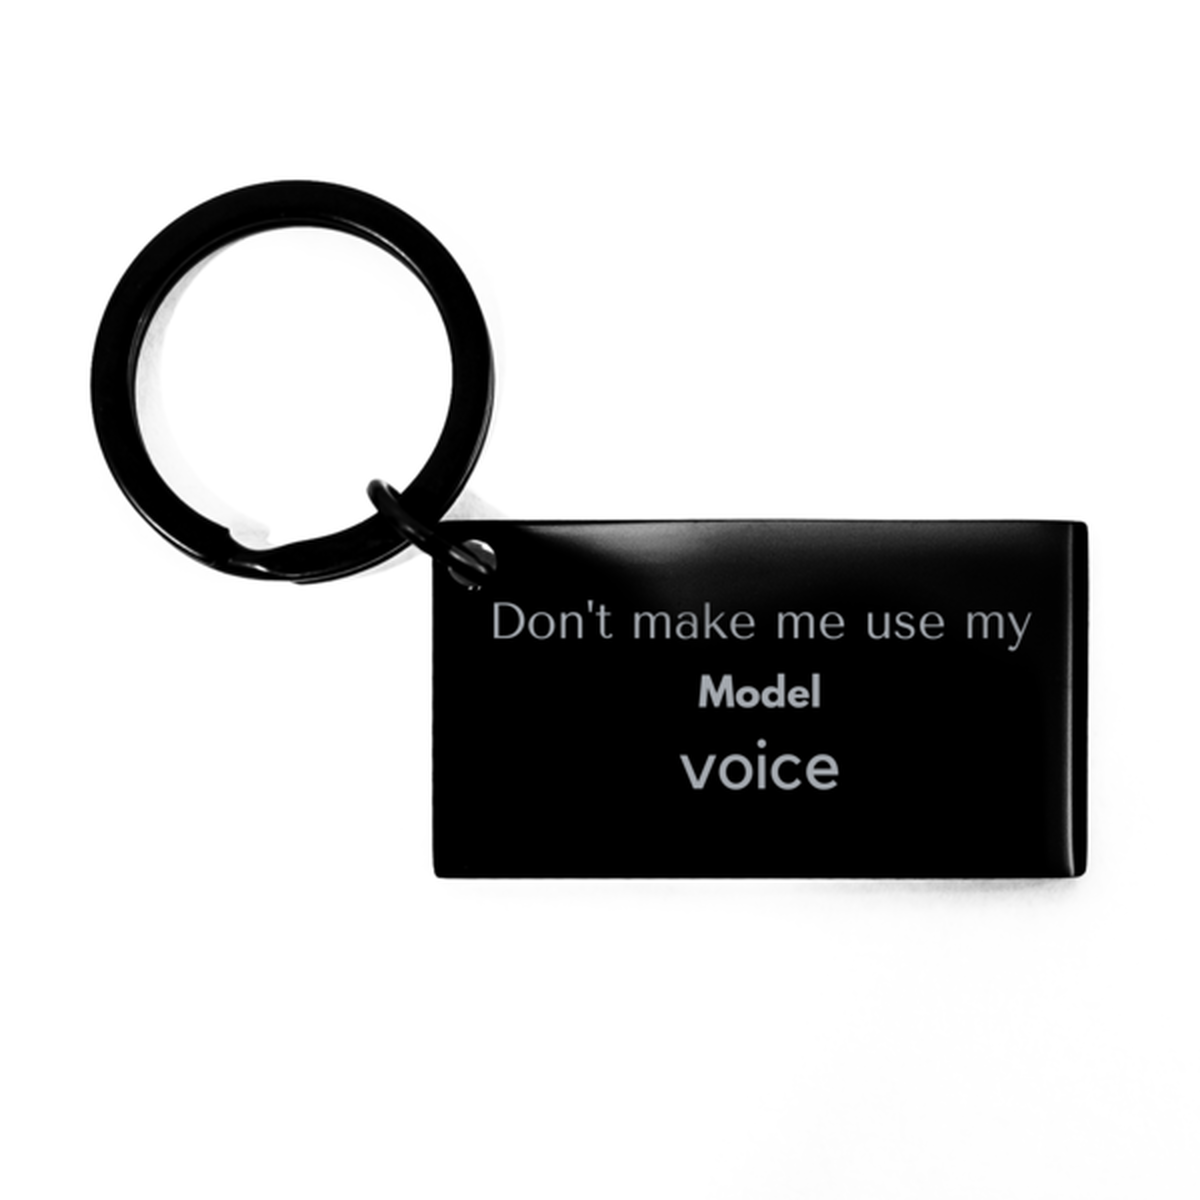 Don't make me use my Model voice, Sarcasm Model Gifts, Christmas Model Keychain Birthday Unique Gifts For Model Coworkers, Men, Women, Colleague, Friends